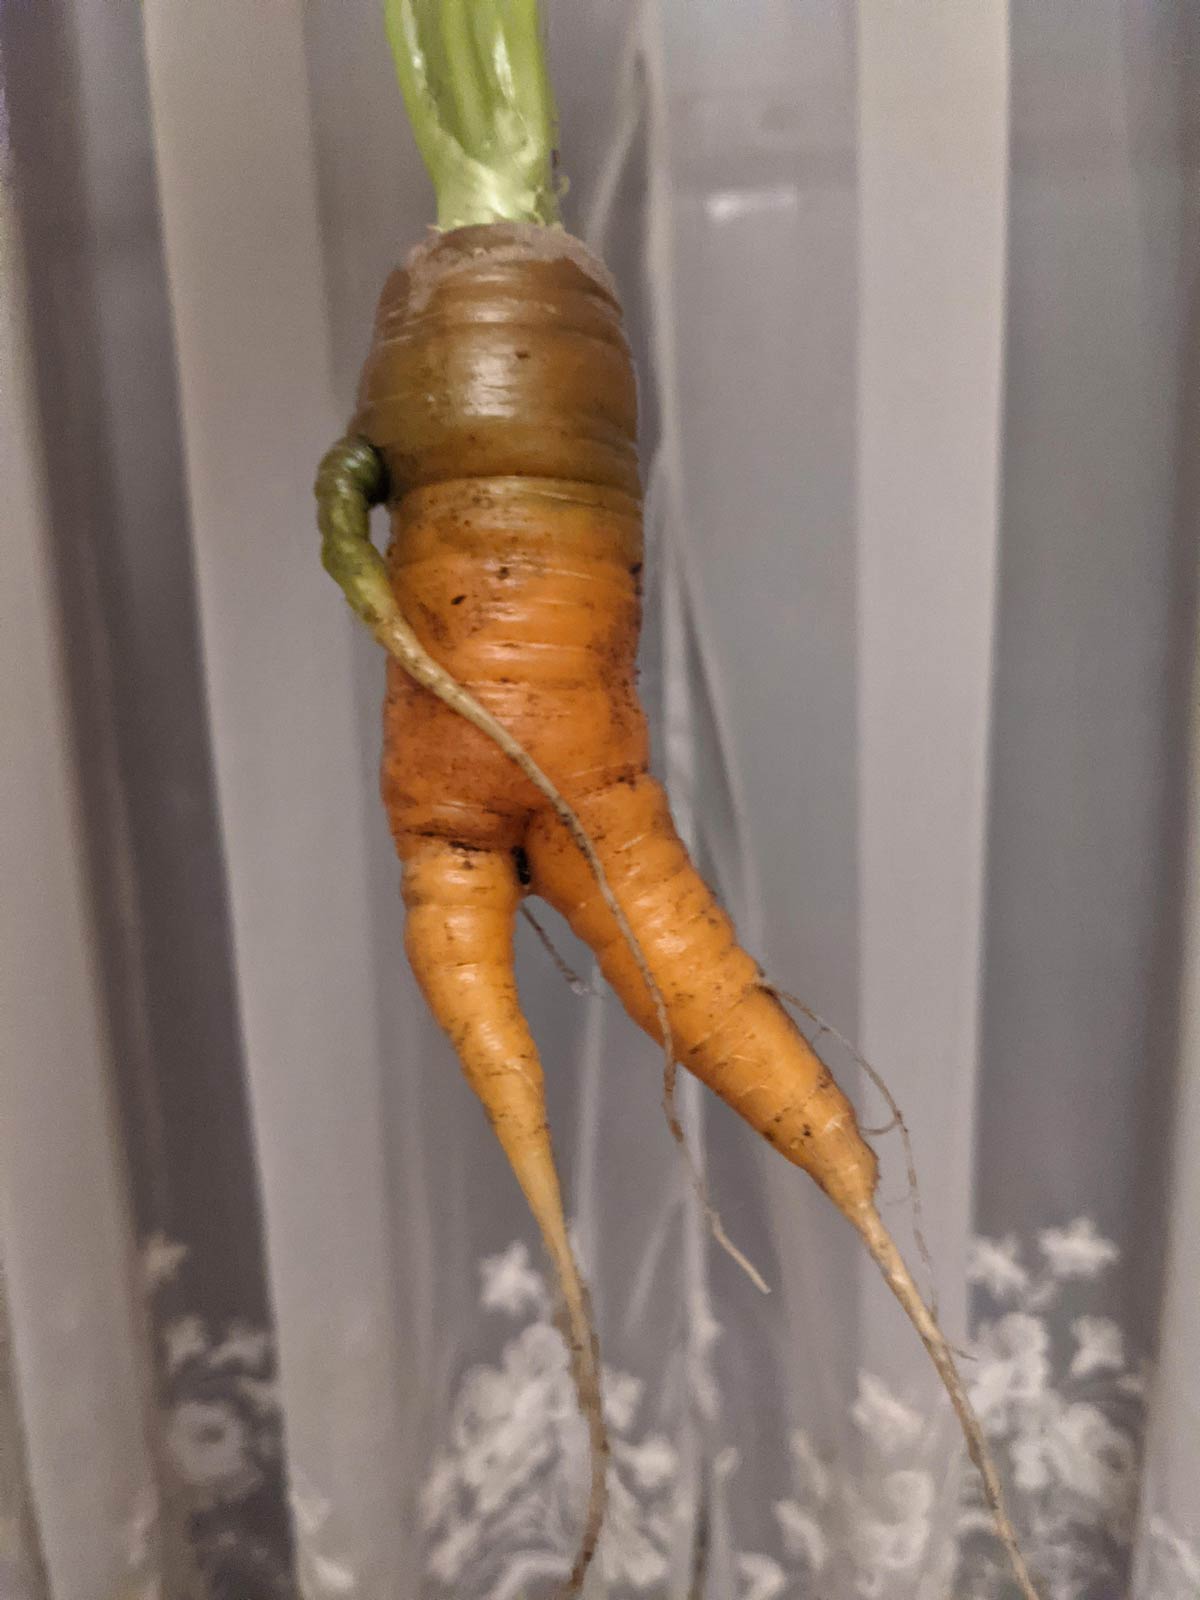 Carrot from our garden has Saturday night fever